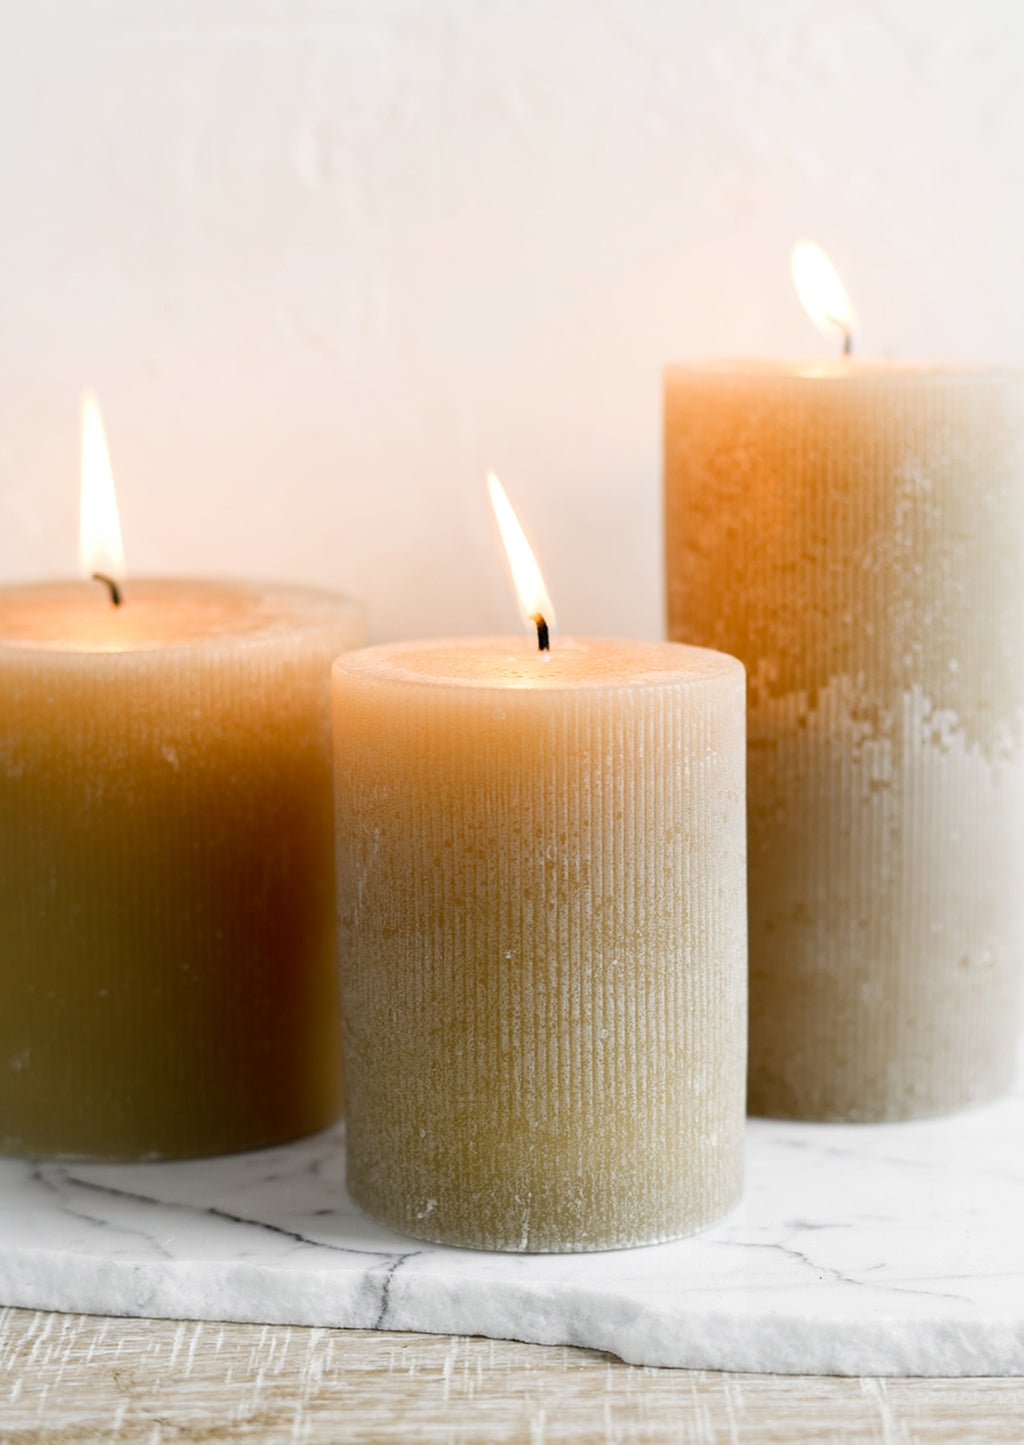 2: Three tan colored pillar candles in assorted sizes.